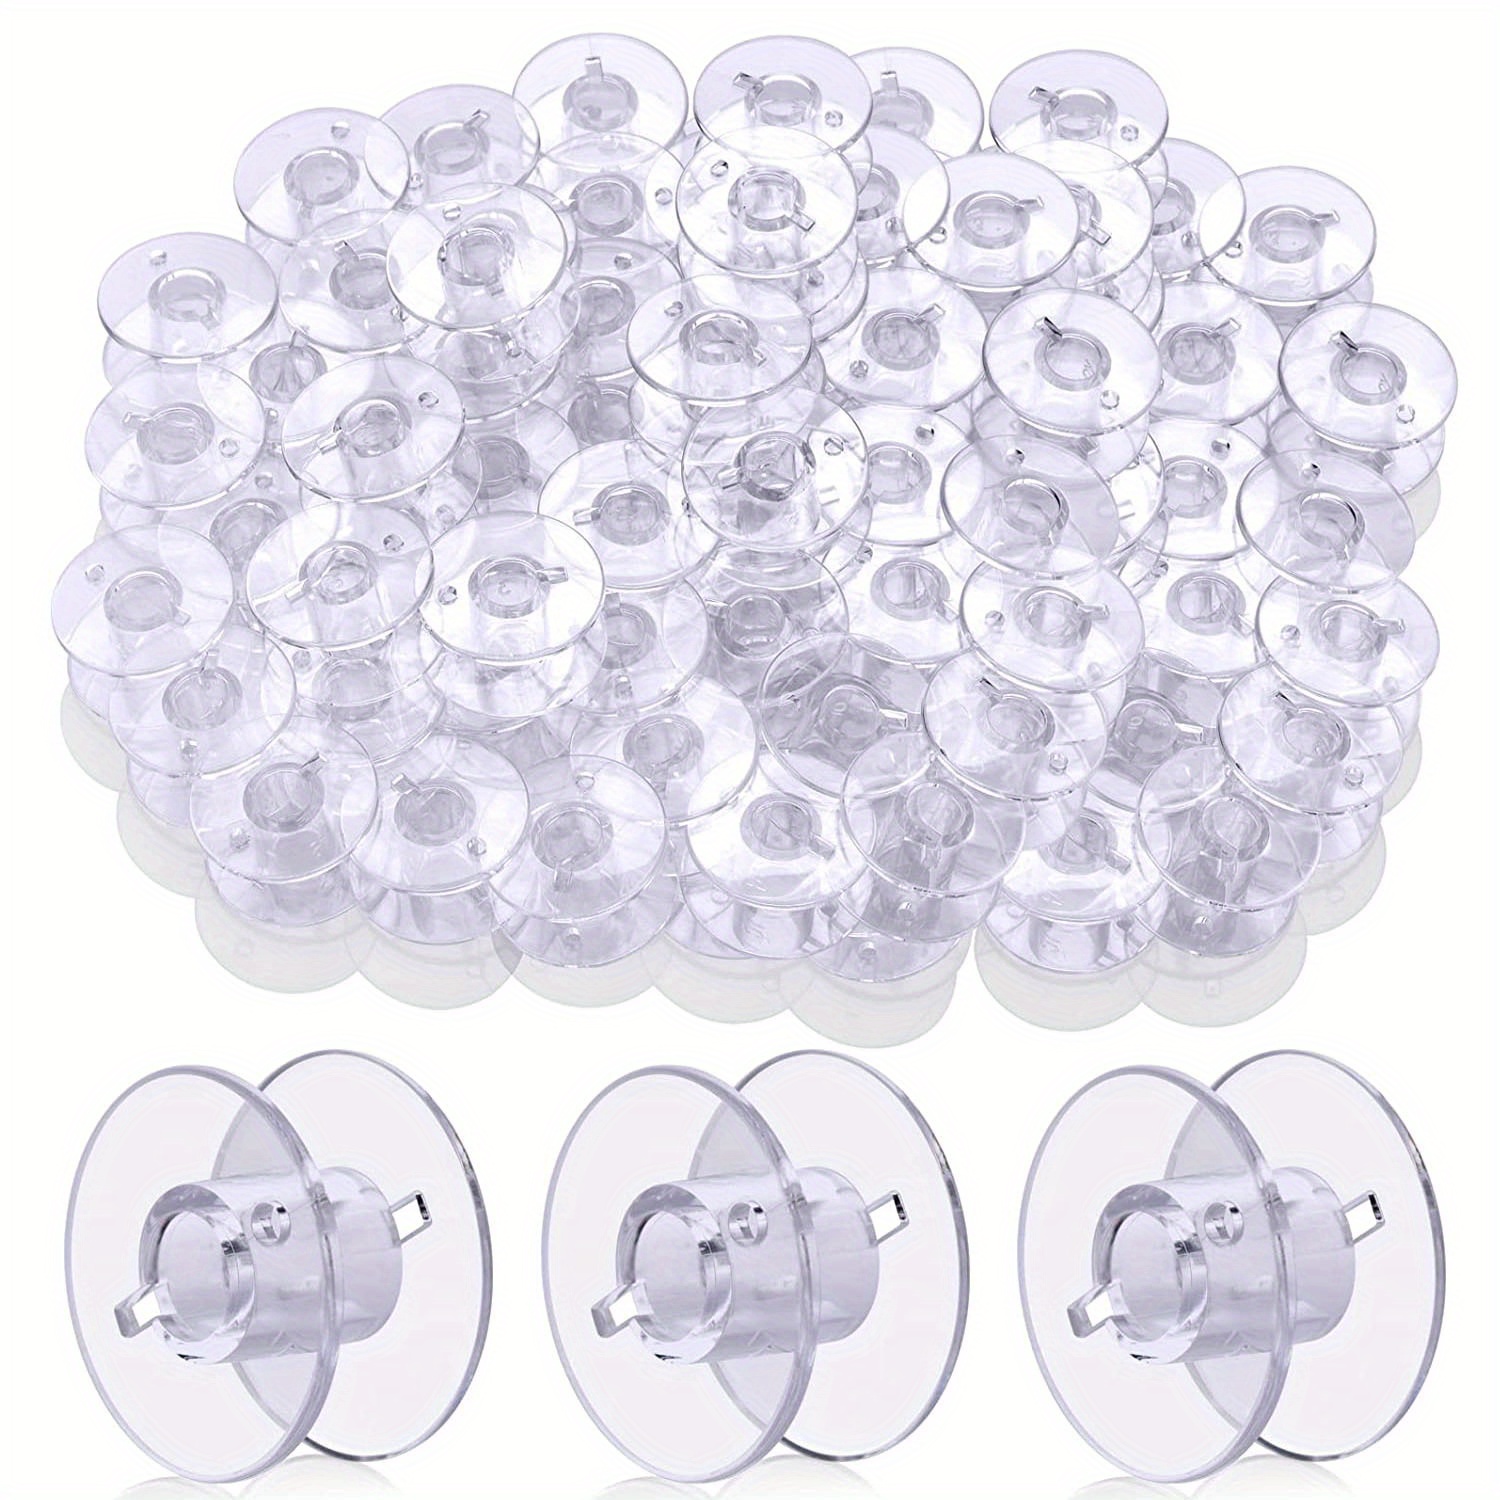 Brother SA156 Bobbins, Clear Plastic, 10-pack, 11.5 size